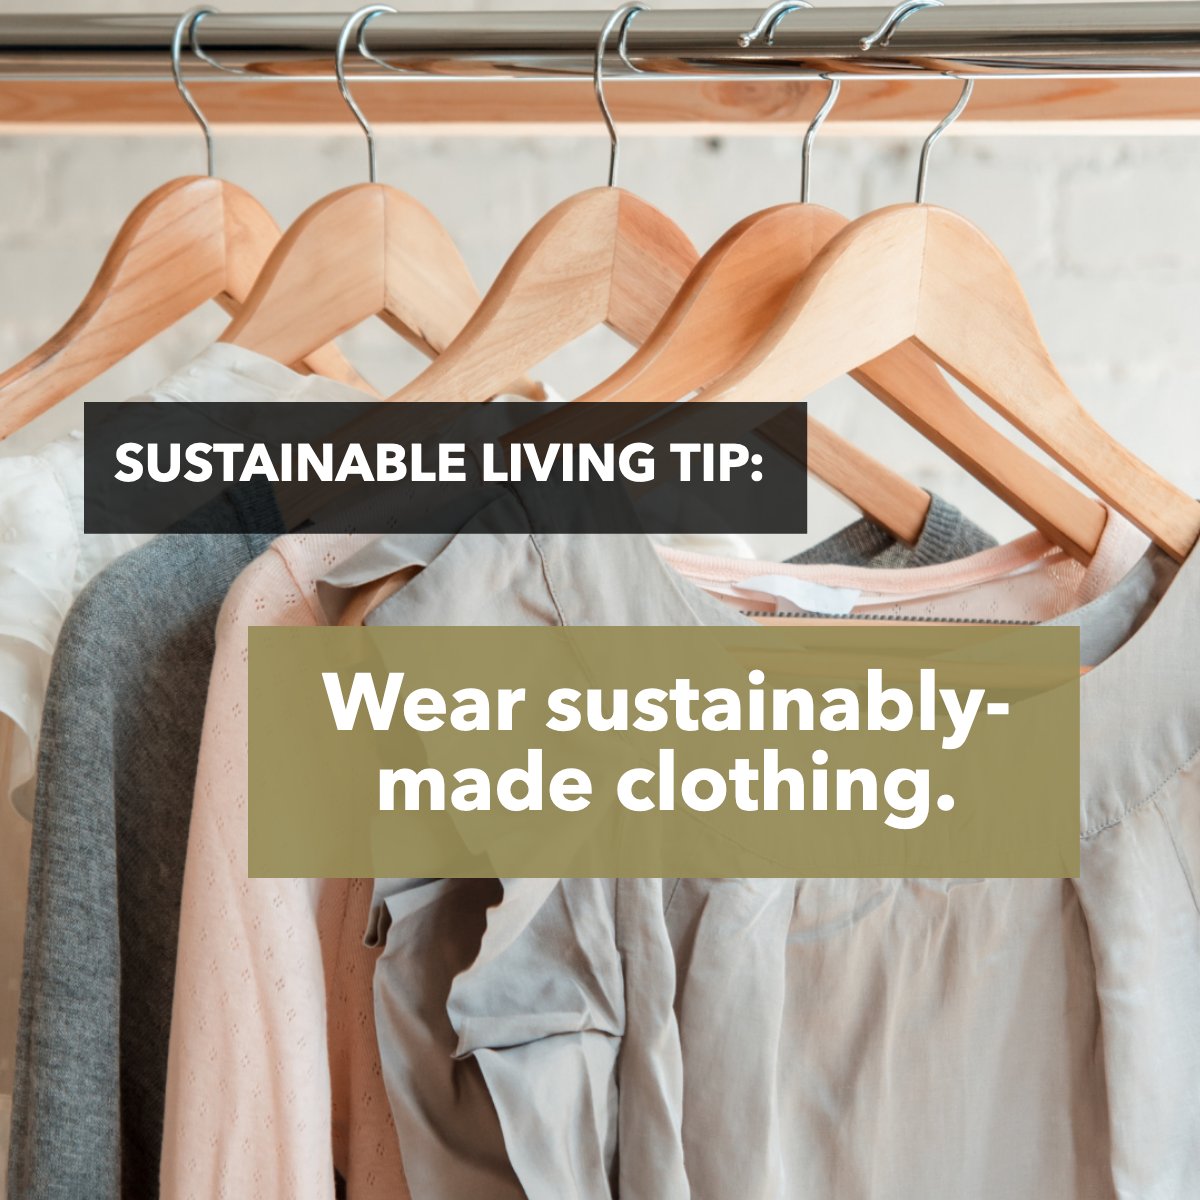 💚 Sustainable fashion 👕 is a design philosophy and movement that promotes environmental and social responsibility! 🌳

Are you part of this movement yet? 💪

#sustainable #fashion #clothes #thinkgreen
 #callniecie